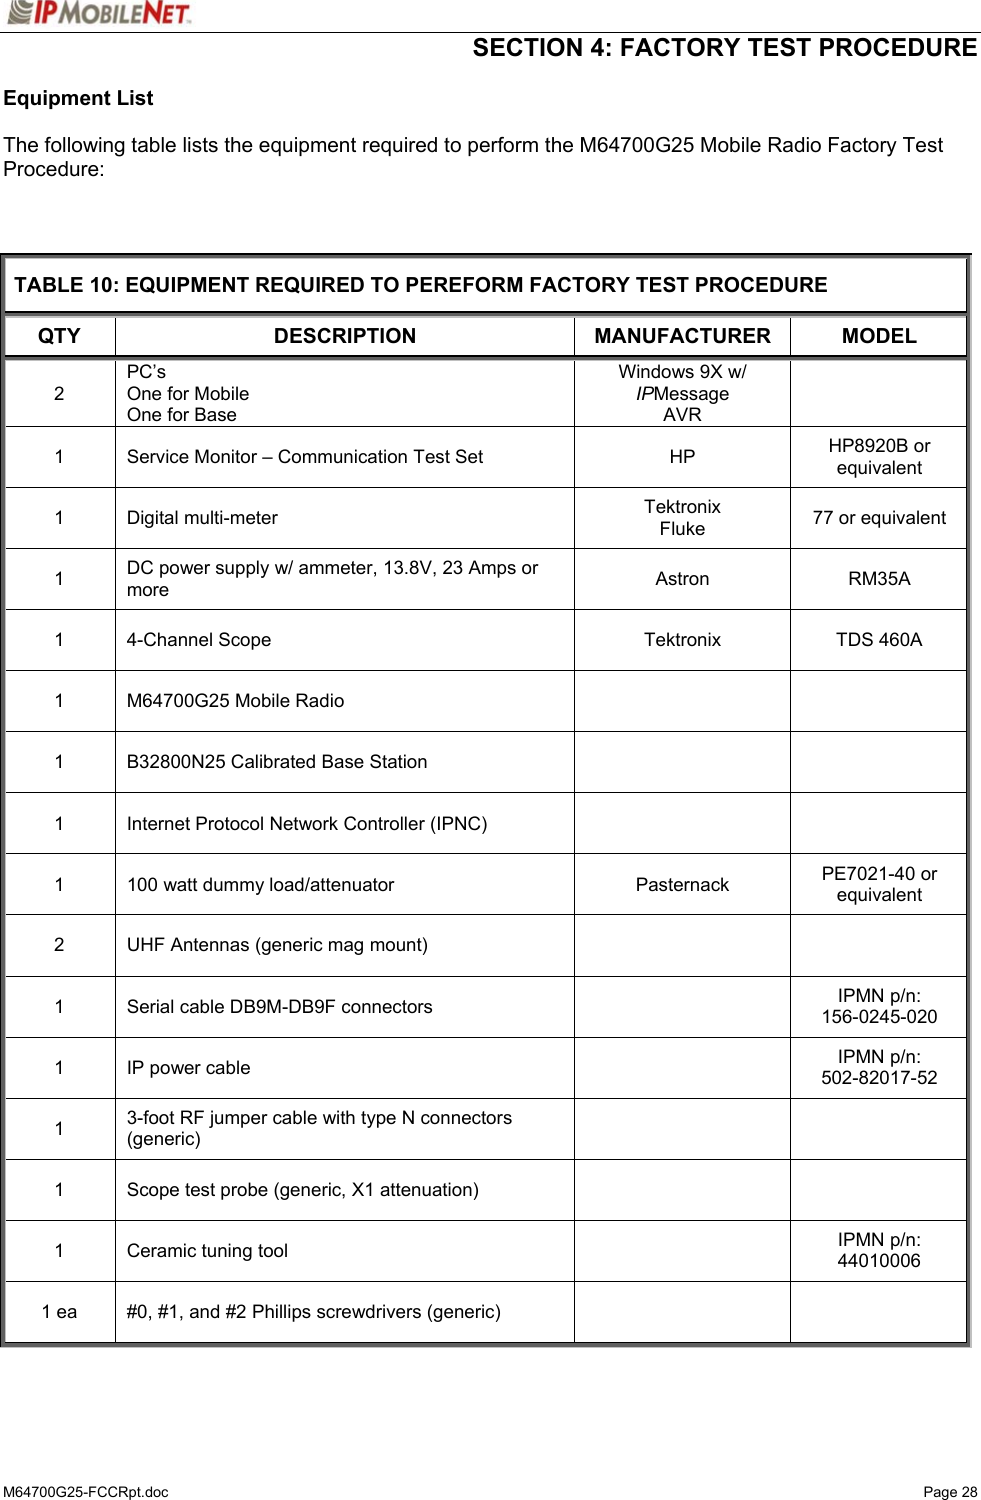  SECTION 4: FACTORY TEST PROCEDURE  M64700G25-FCCRpt.doc   Page 28 Equipment List   The following table lists the equipment required to perform the M64700G25 Mobile Radio Factory Test Procedure:    TABLE 10: EQUIPMENT REQUIRED TO PEREFORM FACTORY TEST PROCEDURE QTY DESCRIPTION MANUFACTURER MODEL 2 PC’s One for Mobile One for Base Windows 9X w/  IPMessage AVR  1  Service Monitor – Communication Test Set  HP  HP8920B or equivalent 1 Digital multi-meter  Tektronix Fluke  77 or equivalent 1  DC power supply w/ ammeter, 13.8V, 23 Amps or more  Astron  RM35A   1  4-Channel Scope  Tektronix  TDS 460A 1  M64700G25 Mobile Radio     1  B32800N25 Calibrated Base Station     1  Internet Protocol Network Controller (IPNC)     1  100 watt dummy load/attenuator  Pasternack  PE7021-40 or equivalent 2  UHF Antennas (generic mag mount)     1  Serial cable DB9M-DB9F connectors    IPMN p/n:  156-0245-020 1  IP power cable    IPMN p/n: 502-82017-52 1  3-foot RF jumper cable with type N connectors (generic)    1  Scope test probe (generic, X1 attenuation)     1  Ceramic tuning tool    IPMN p/n: 44010006 1 ea  #0, #1, and #2 Phillips screwdrivers (generic)        